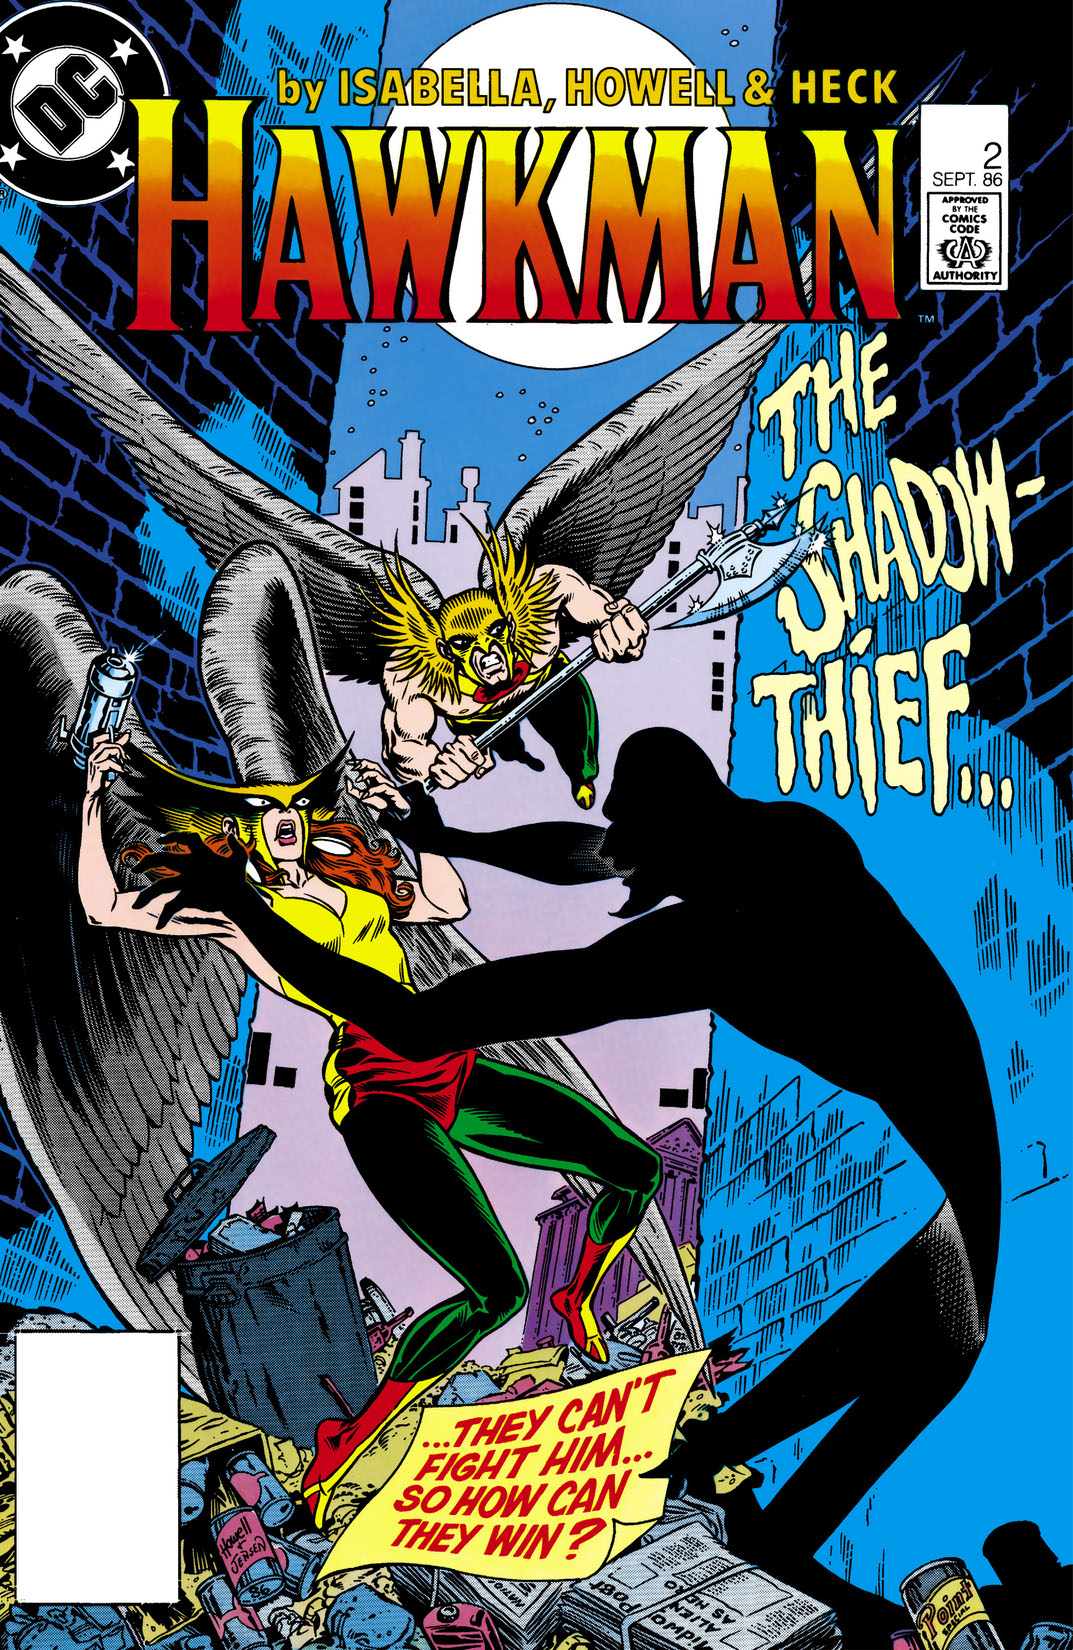 Hawkman (1986-) #2 preview images